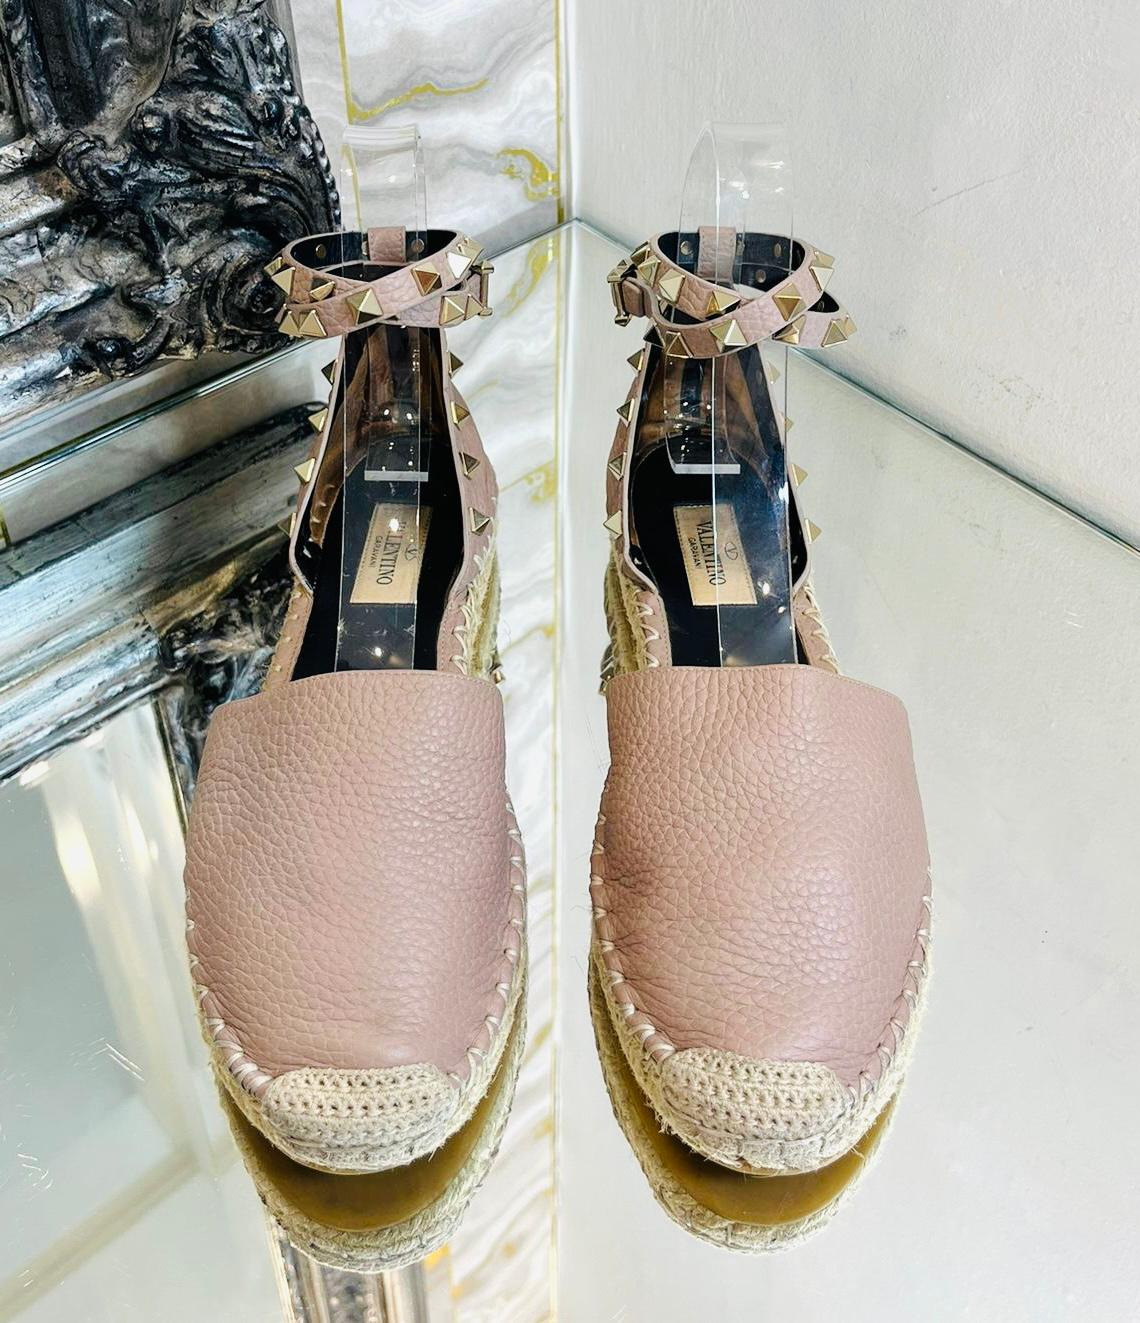 Valentino Rockstud Double Leather Espadrilles

Nude sandals crafted from textured leather and set on a jute platform.

Detailed with the brand's signature hand-placed gold pyramid studs.

Featuring double ankle strap with buckle closure and white